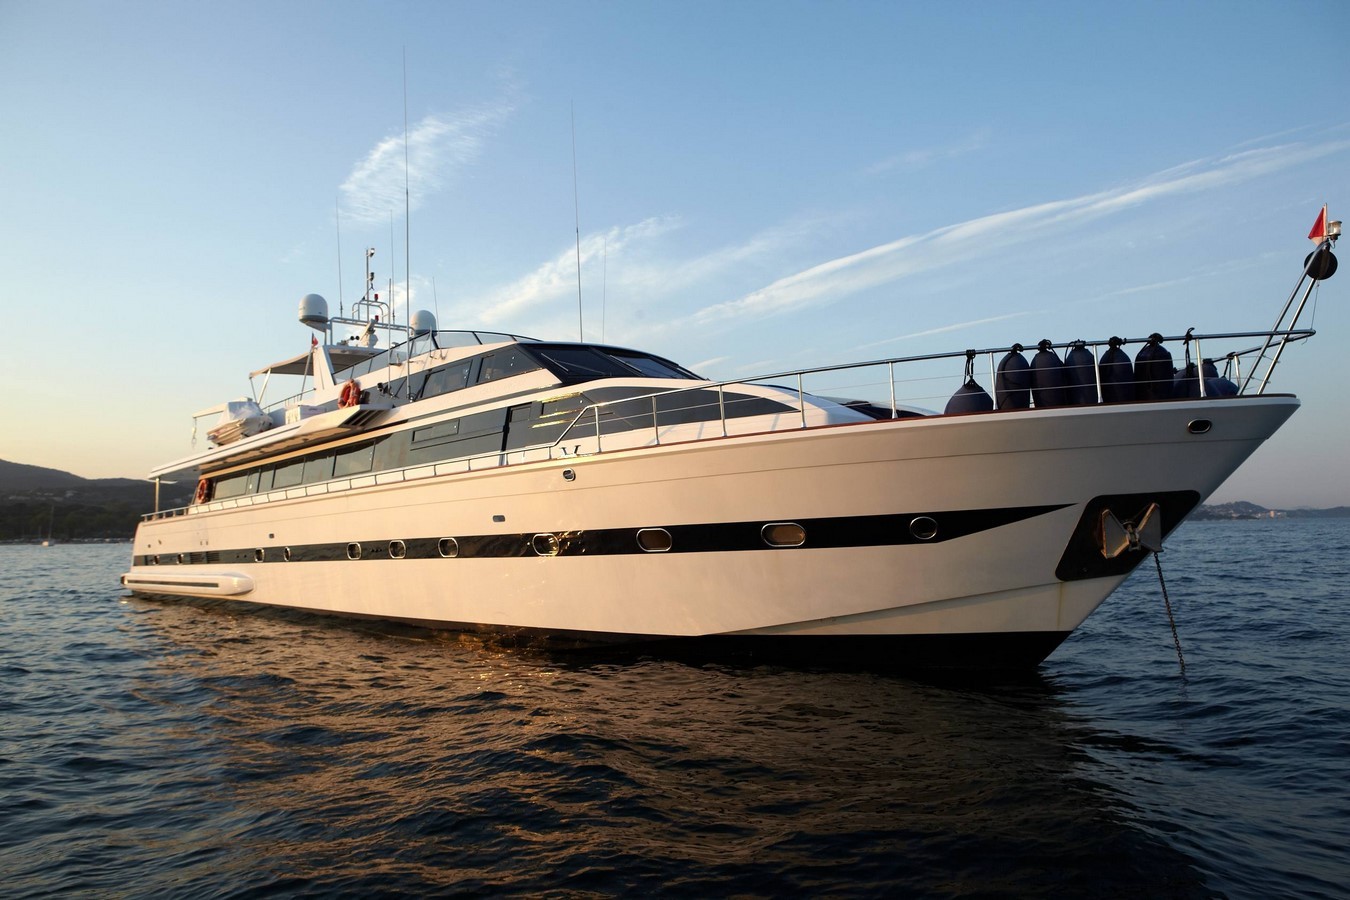 Versilcraft Yacht QUEEN SOUTH - Anchored